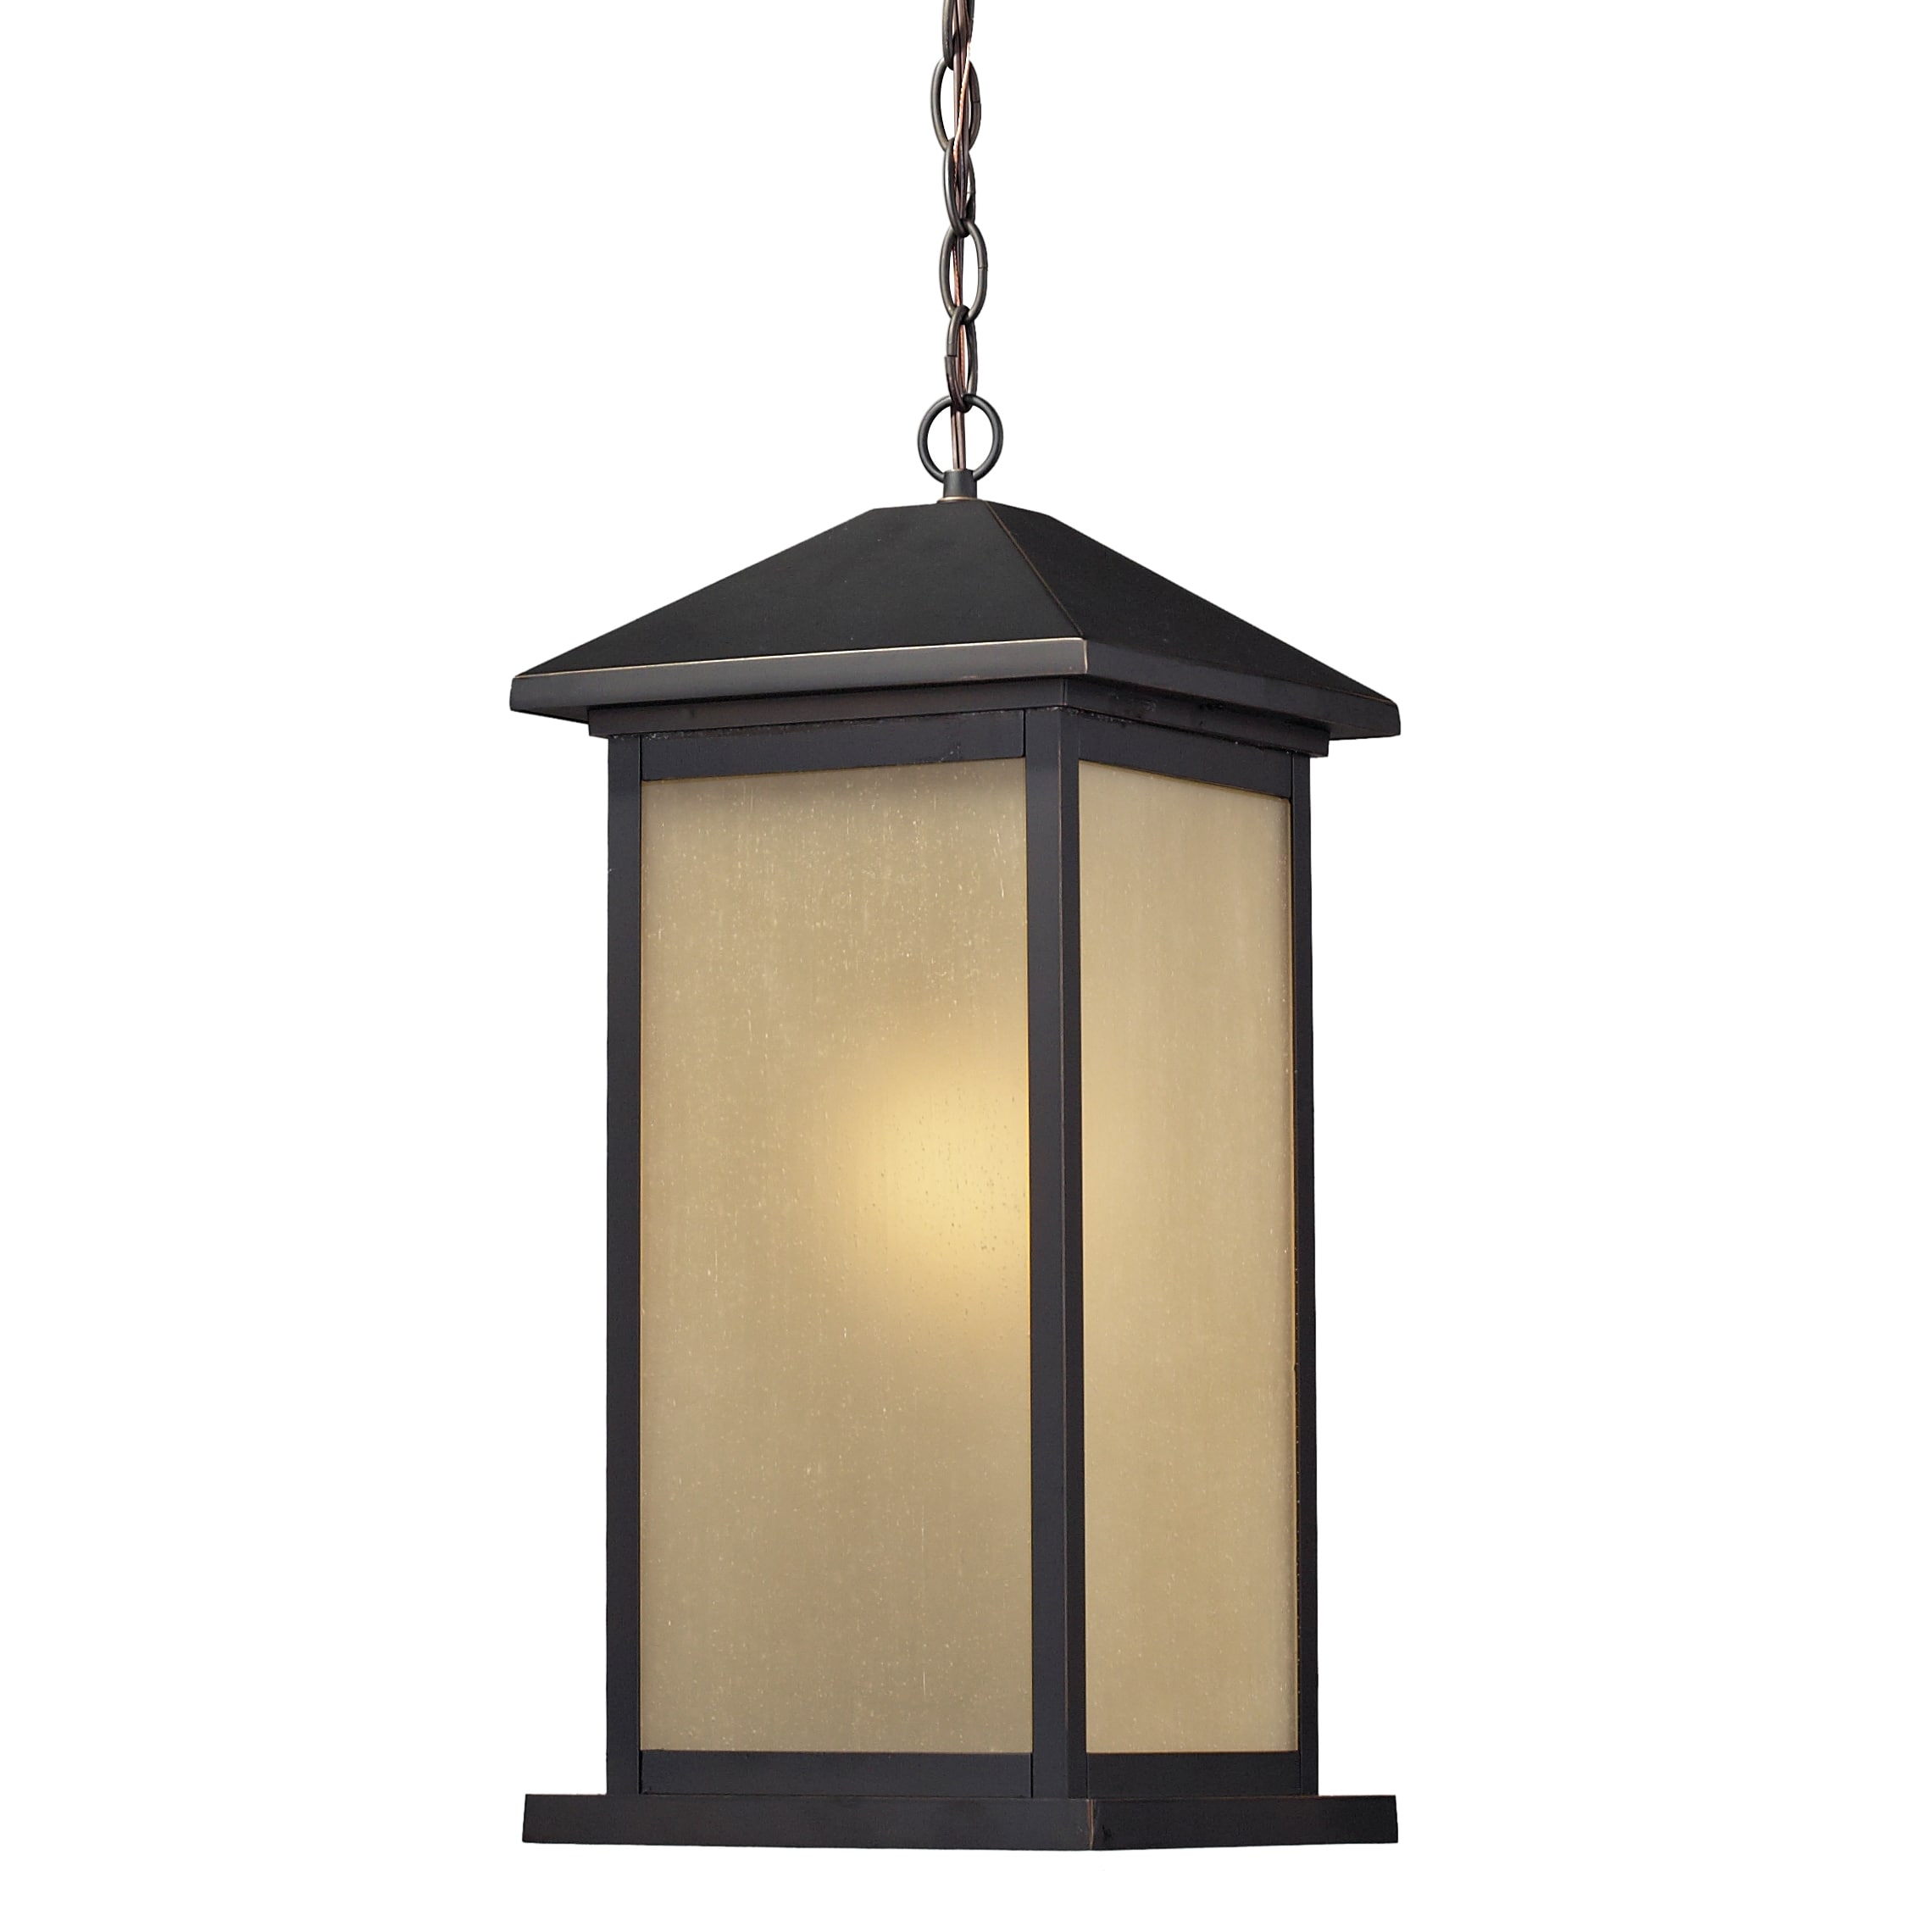 Z-Lite 548chb-orb Vienna 1 Light 10 Inch Oil Rubbed Bronze Outdoor Chain Mount for sale online 